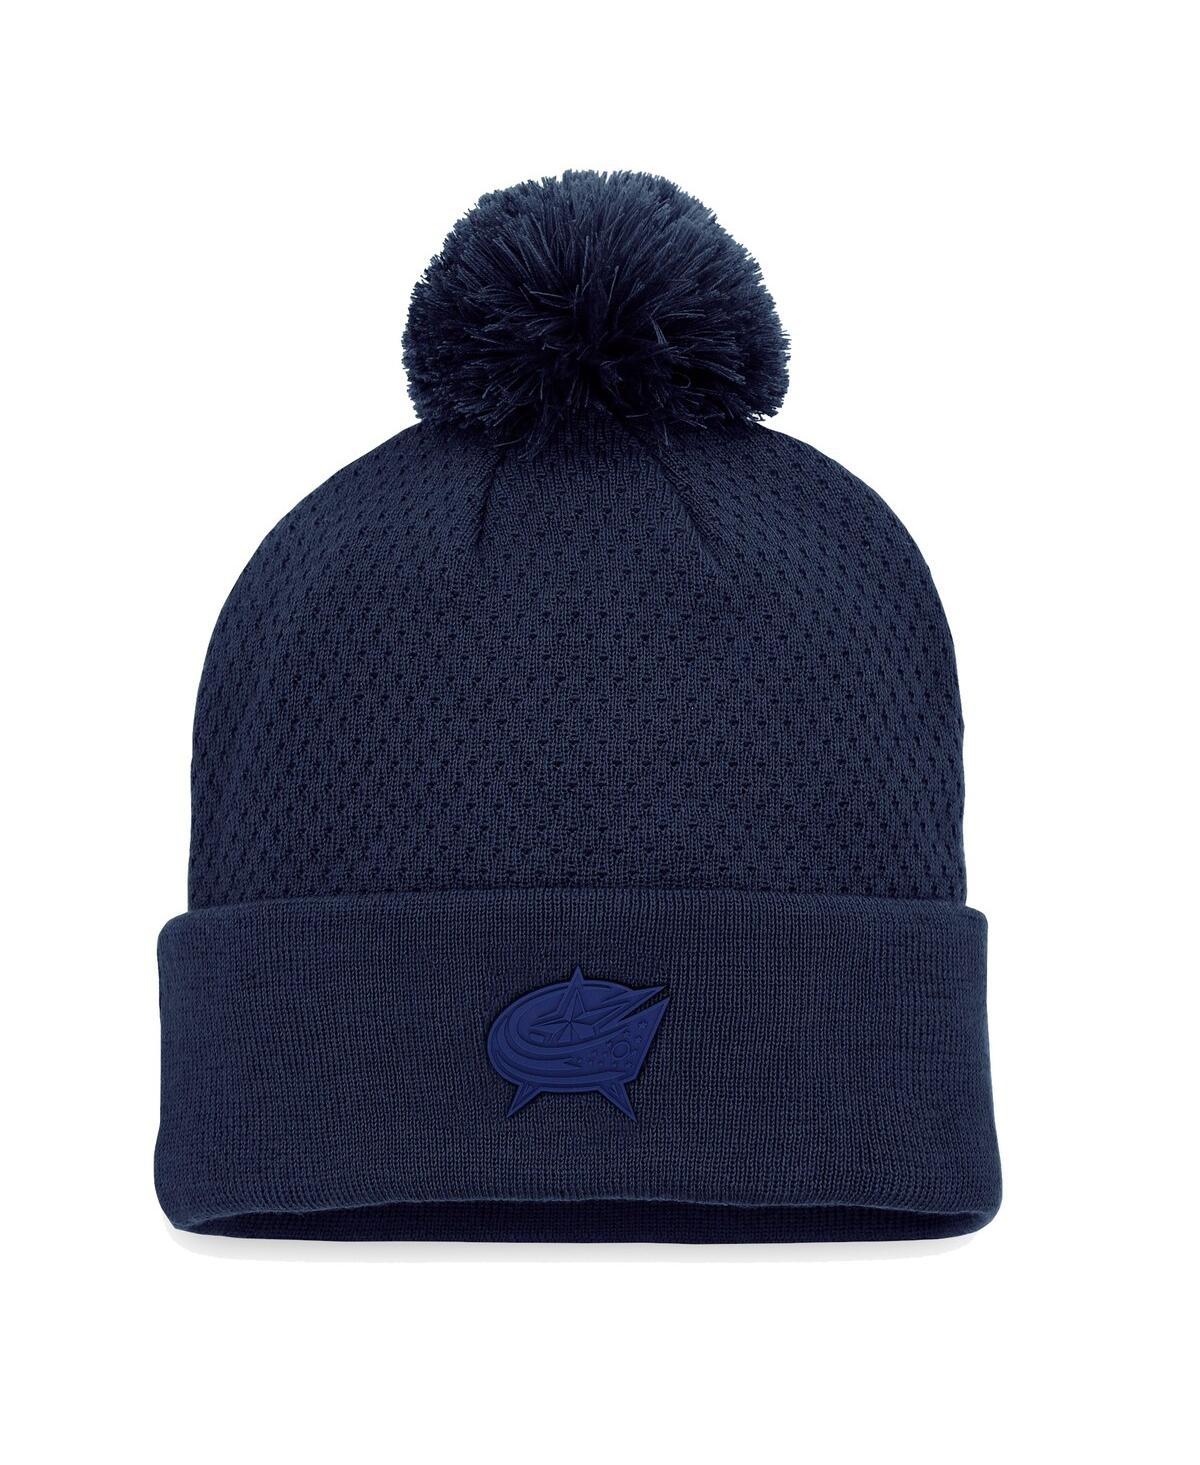 Shop Fanatics Women's  Navy Columbus Blue Jackets Authentic Pro Road Cuffed Knit Hat With Pom